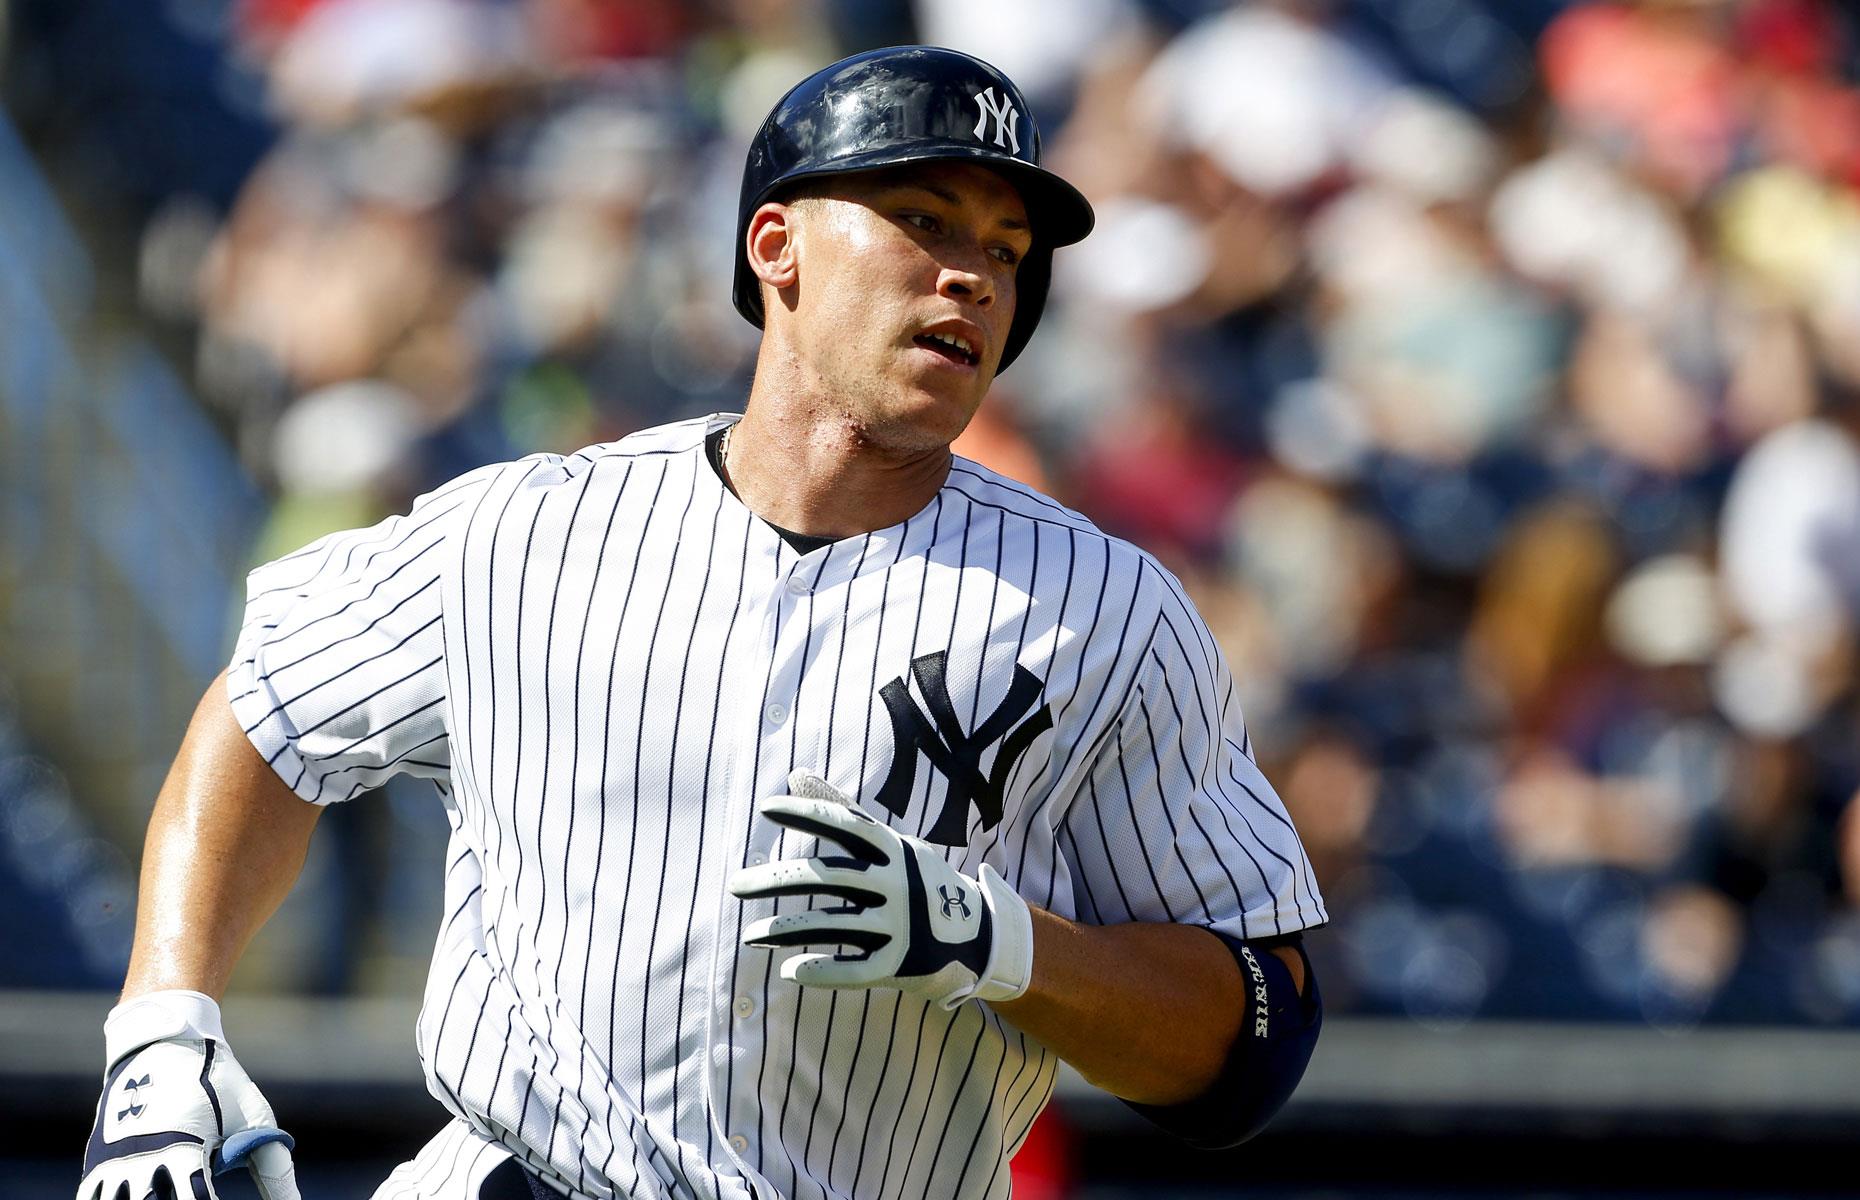 Jersey worn in Aaron Judge debut with New York Yankees sells for $157,366 -  ESPN